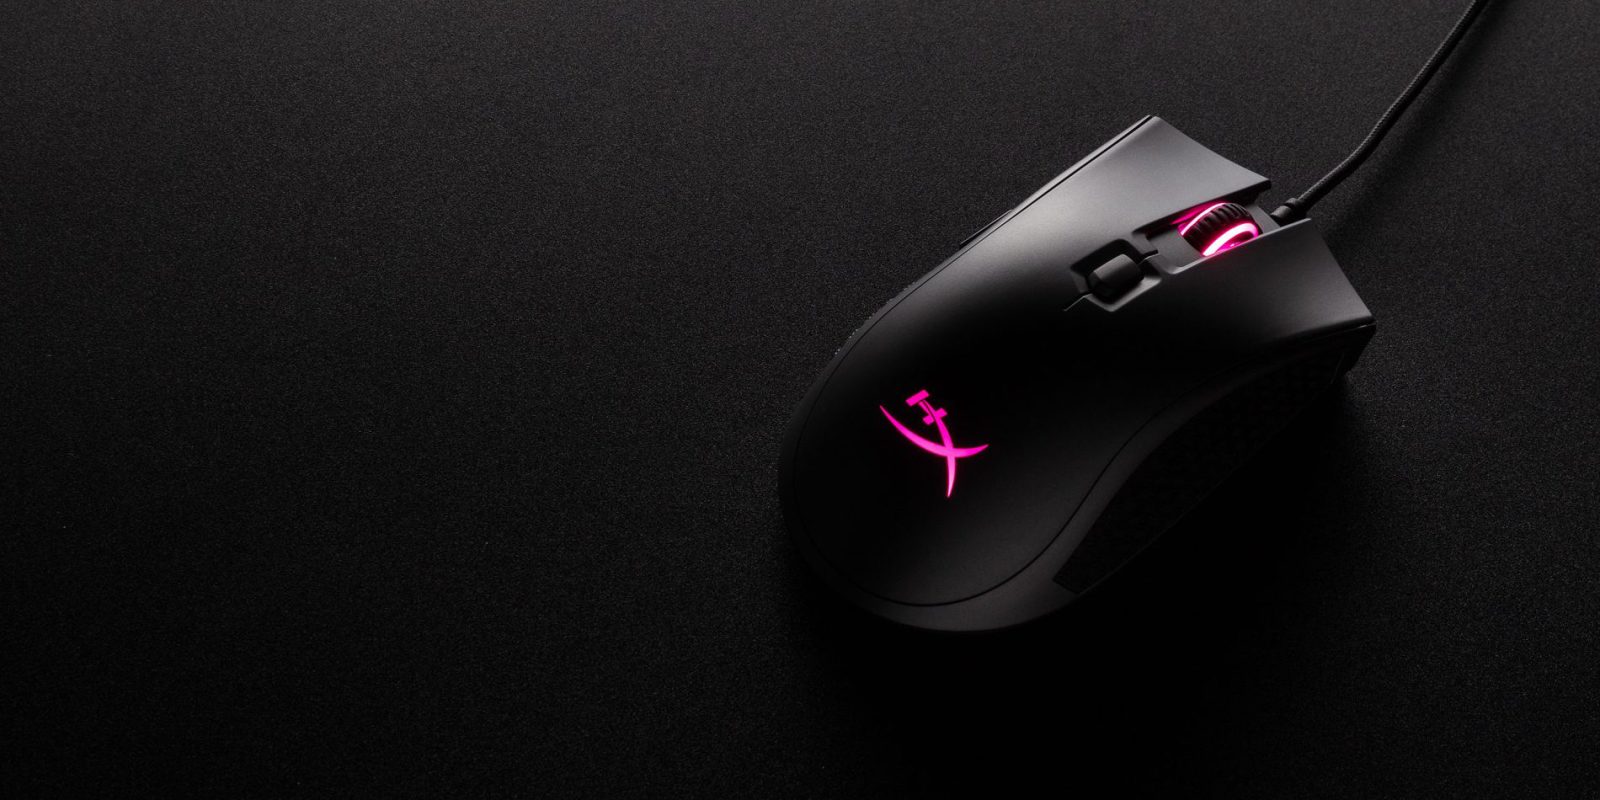 HyperX's new Pulsefire FPS Pro gaming mouse packs onboard ...